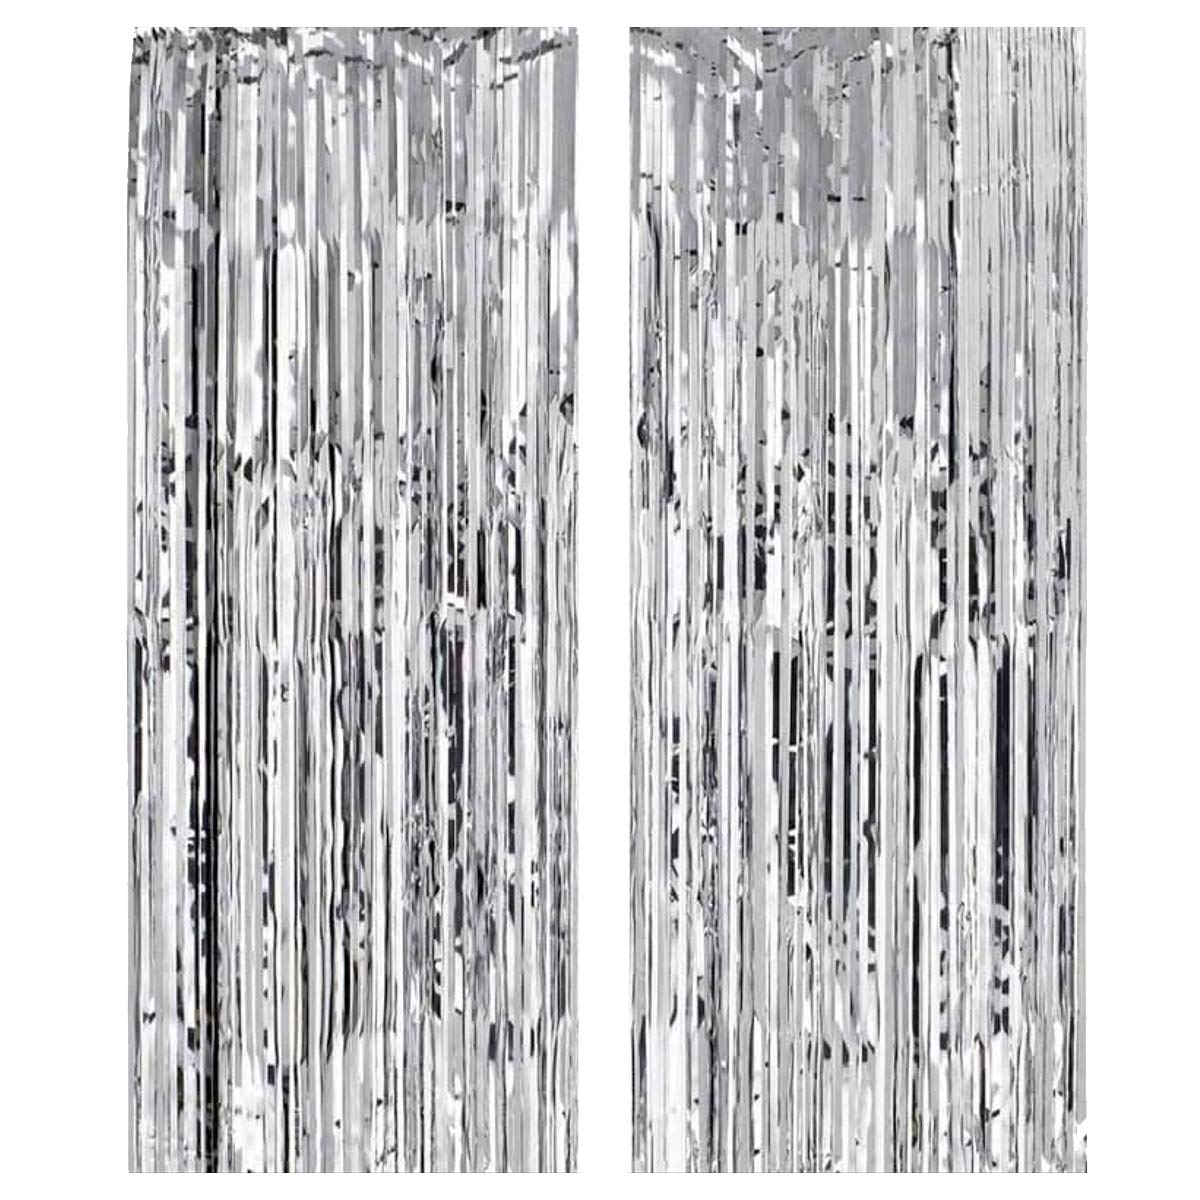 Metallic Silver Foil Fringe Curtains for Party Photo Backdrop Wedding Birthday Decor (2 Pack, Silver) – 3 X 6 ft